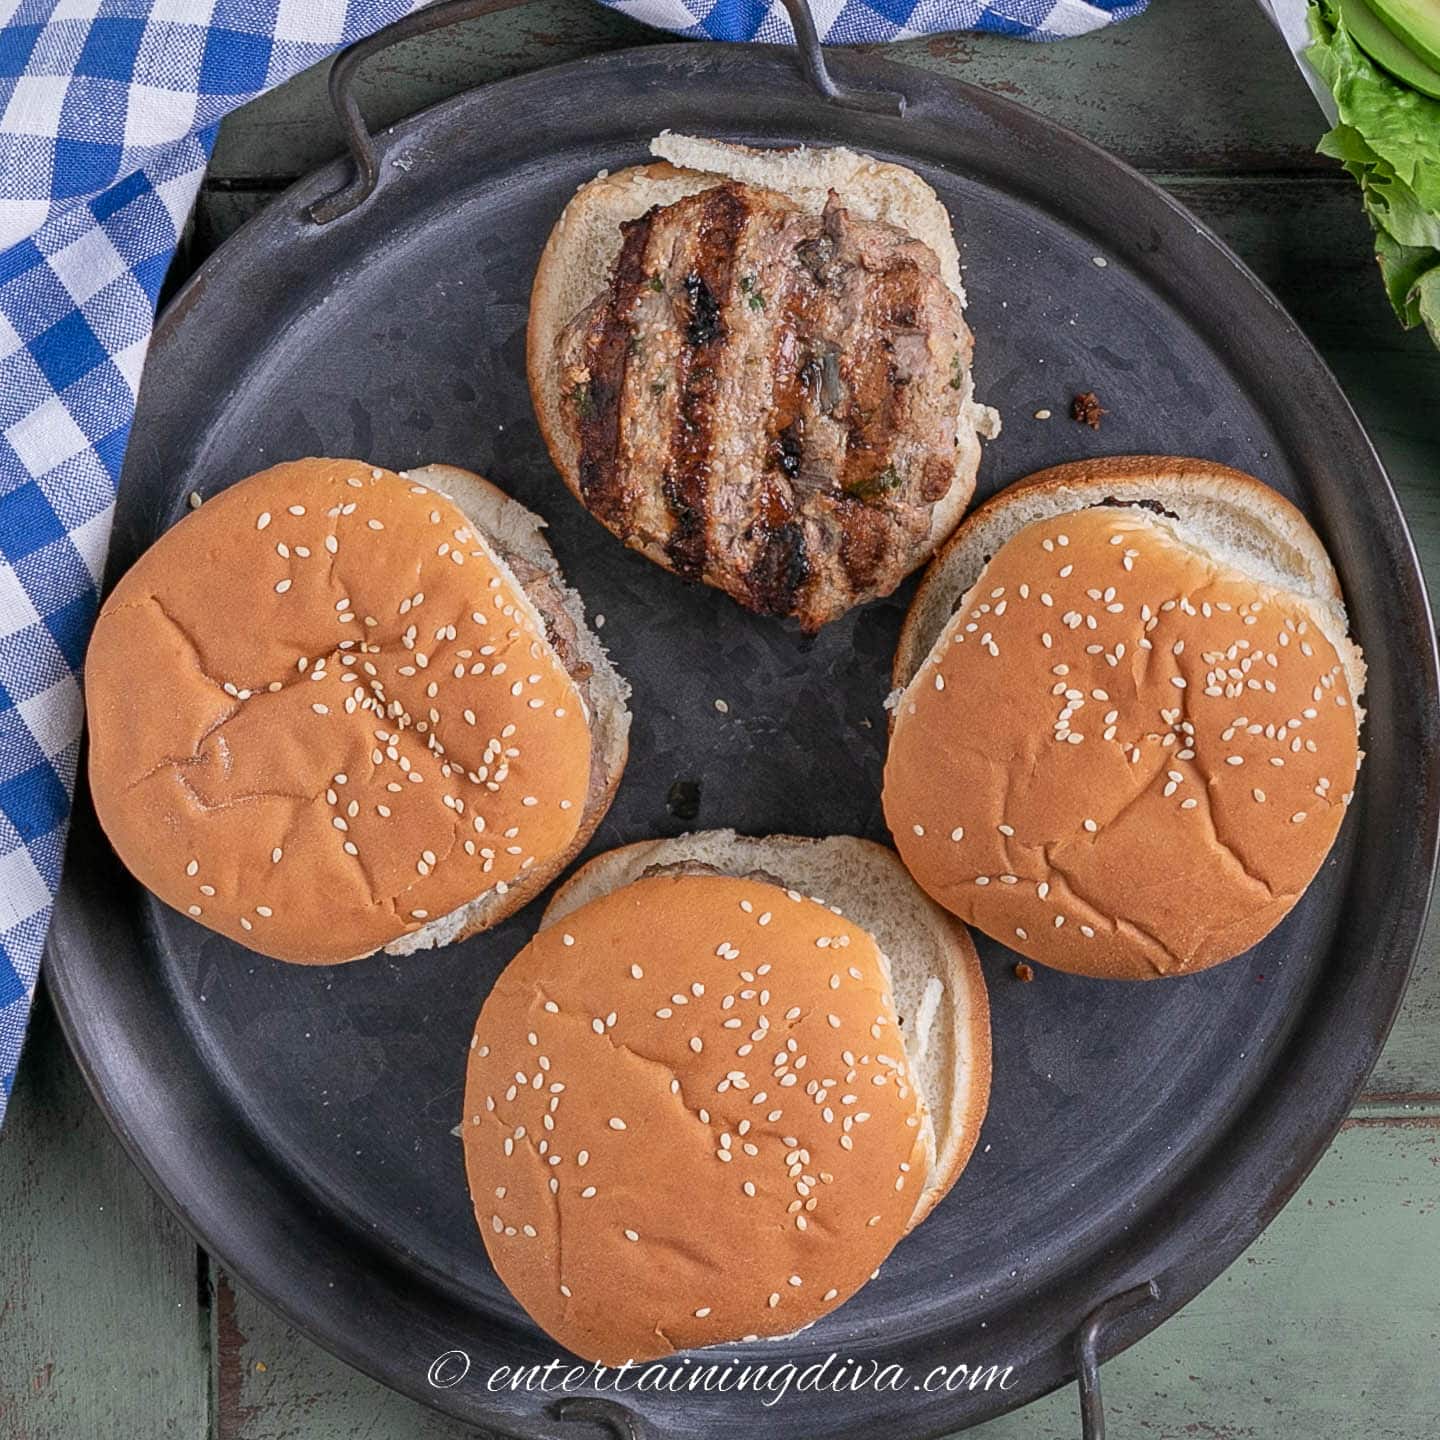 4 pesto turkey burgers on a tray, 3 with buns on top and 1 without